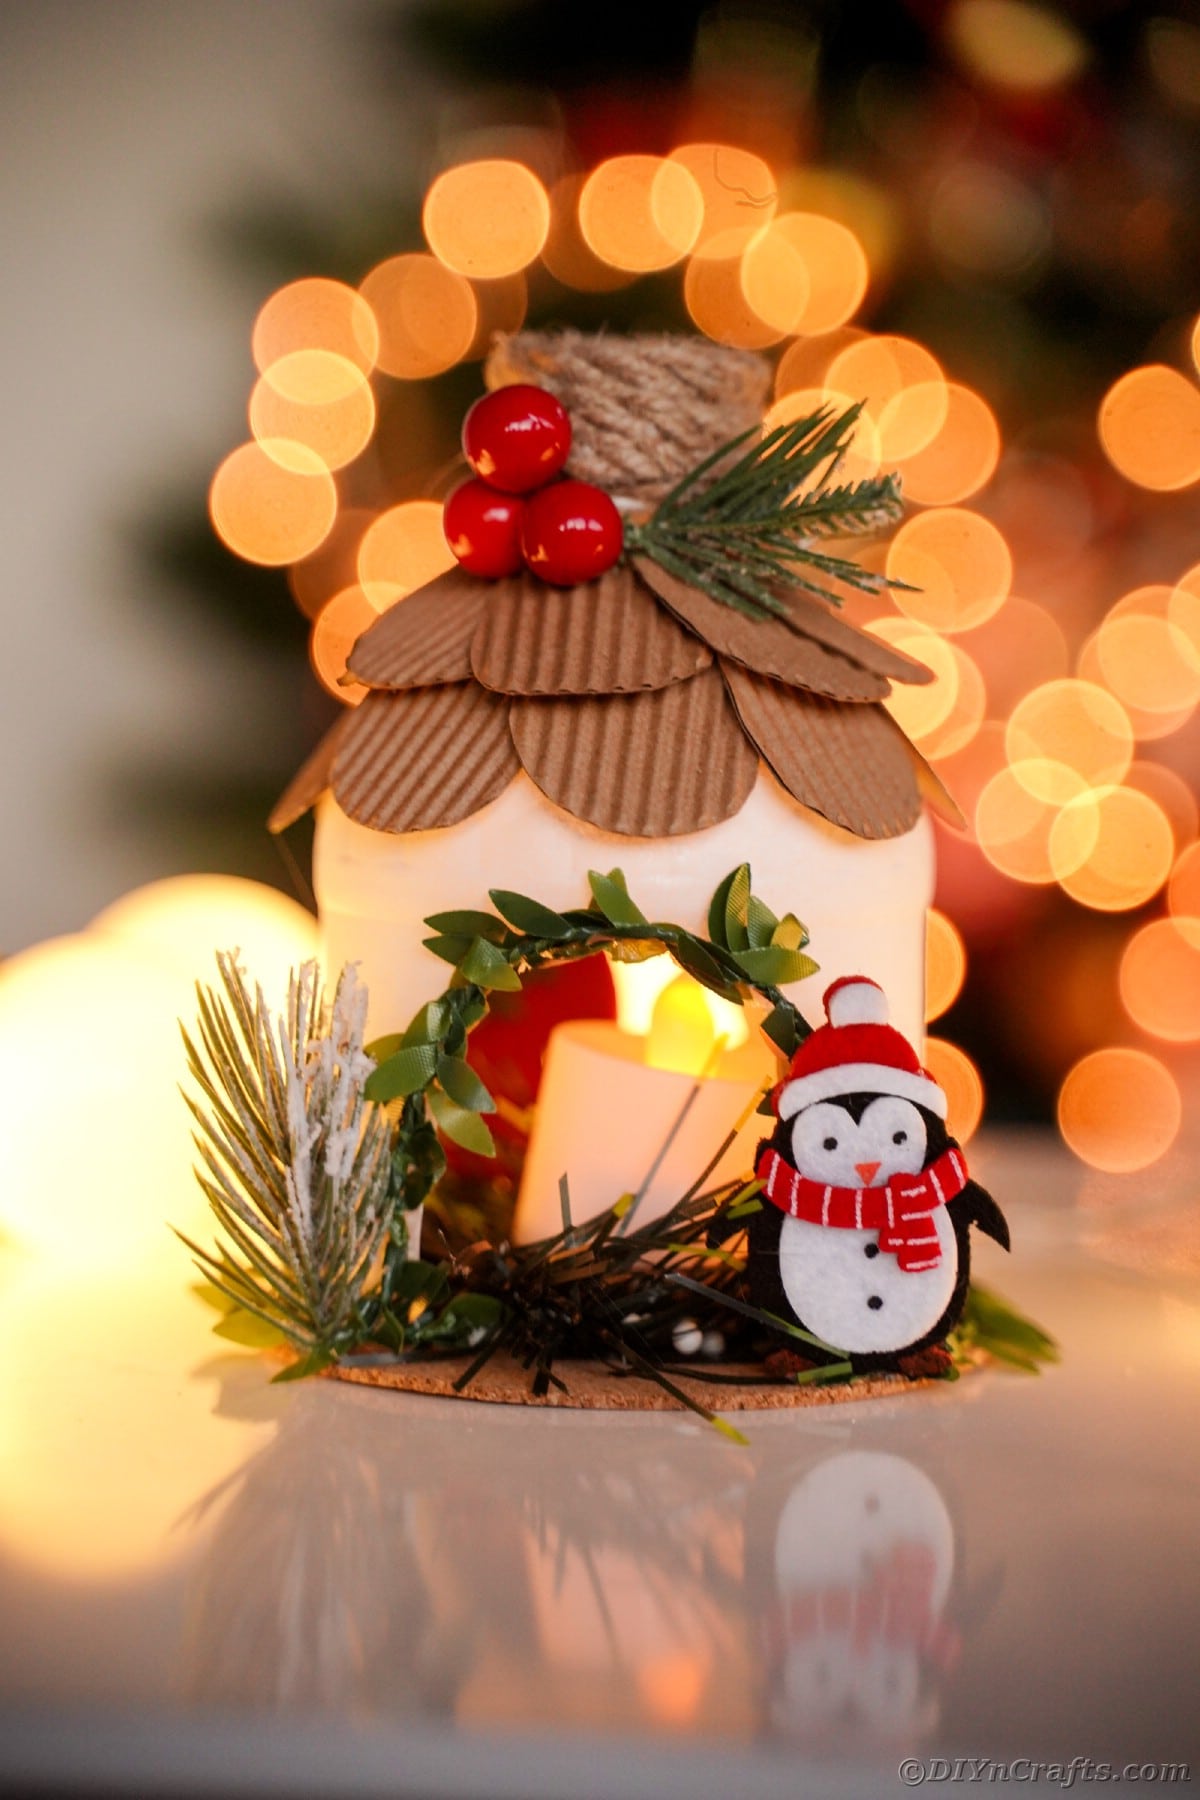 mini house with penguin on side and cardboard shingles sitting on table in front of twinkling holiday lights